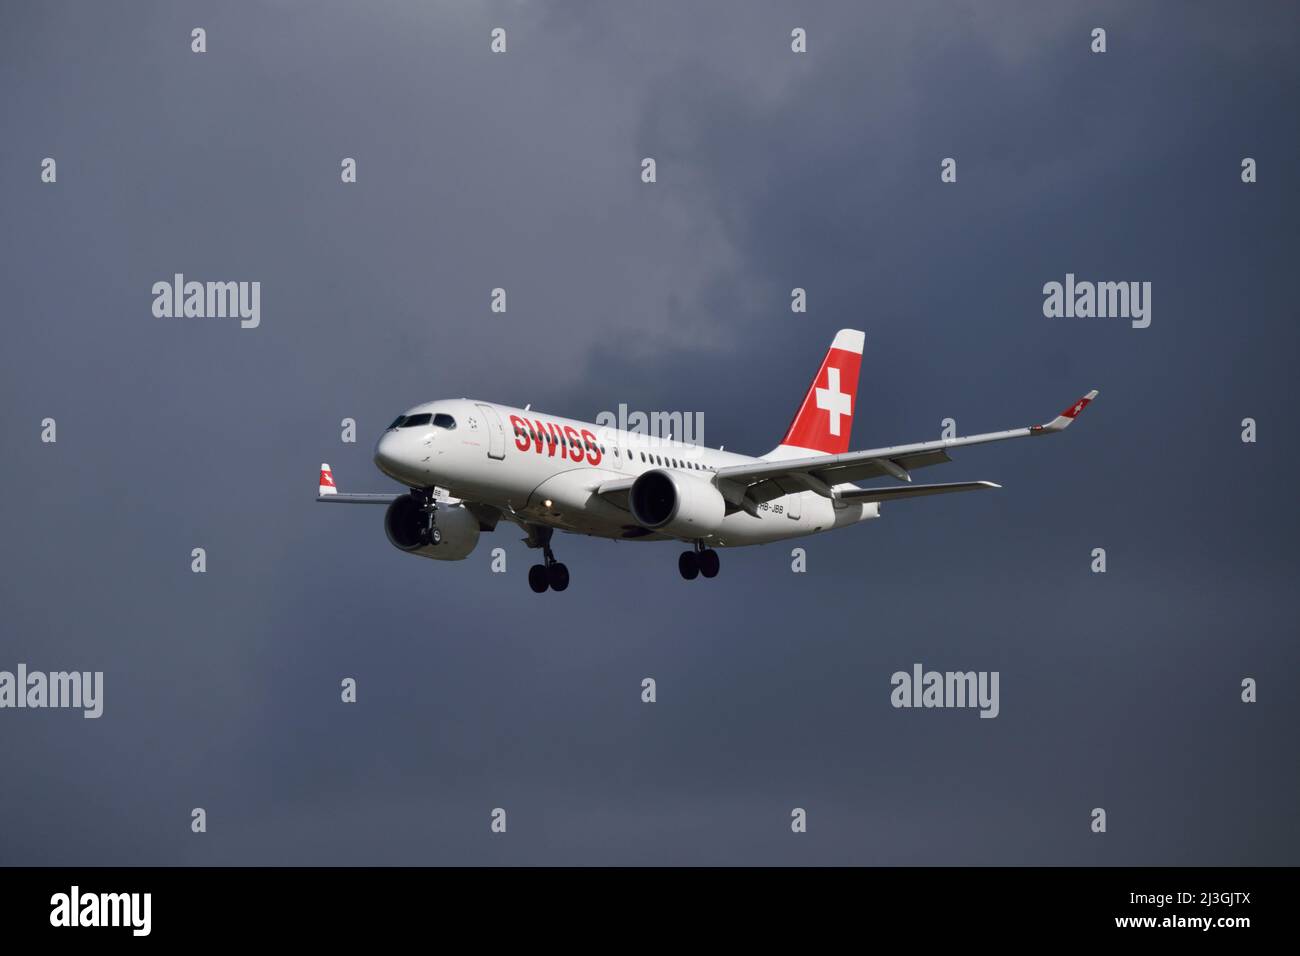 Swiss Airlines Airbus A220 coming in to land at London City Airport on a stormy day Stock Photo